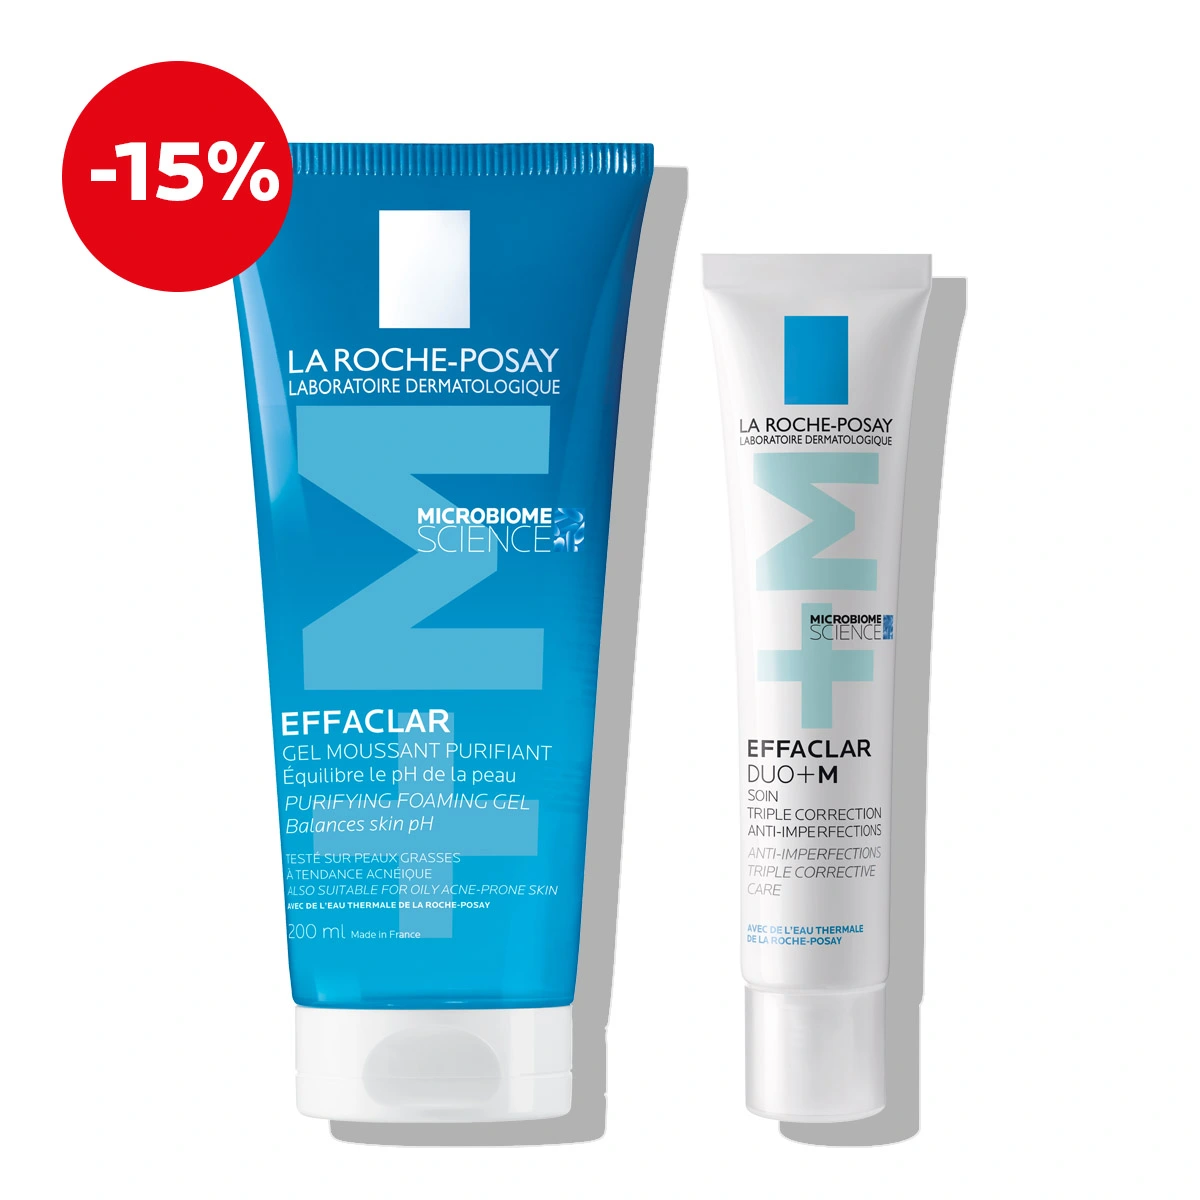 La Roche-Posay EFFACLAR Protocol for skin prone to acne and irregularities (cleansing and care) (2)